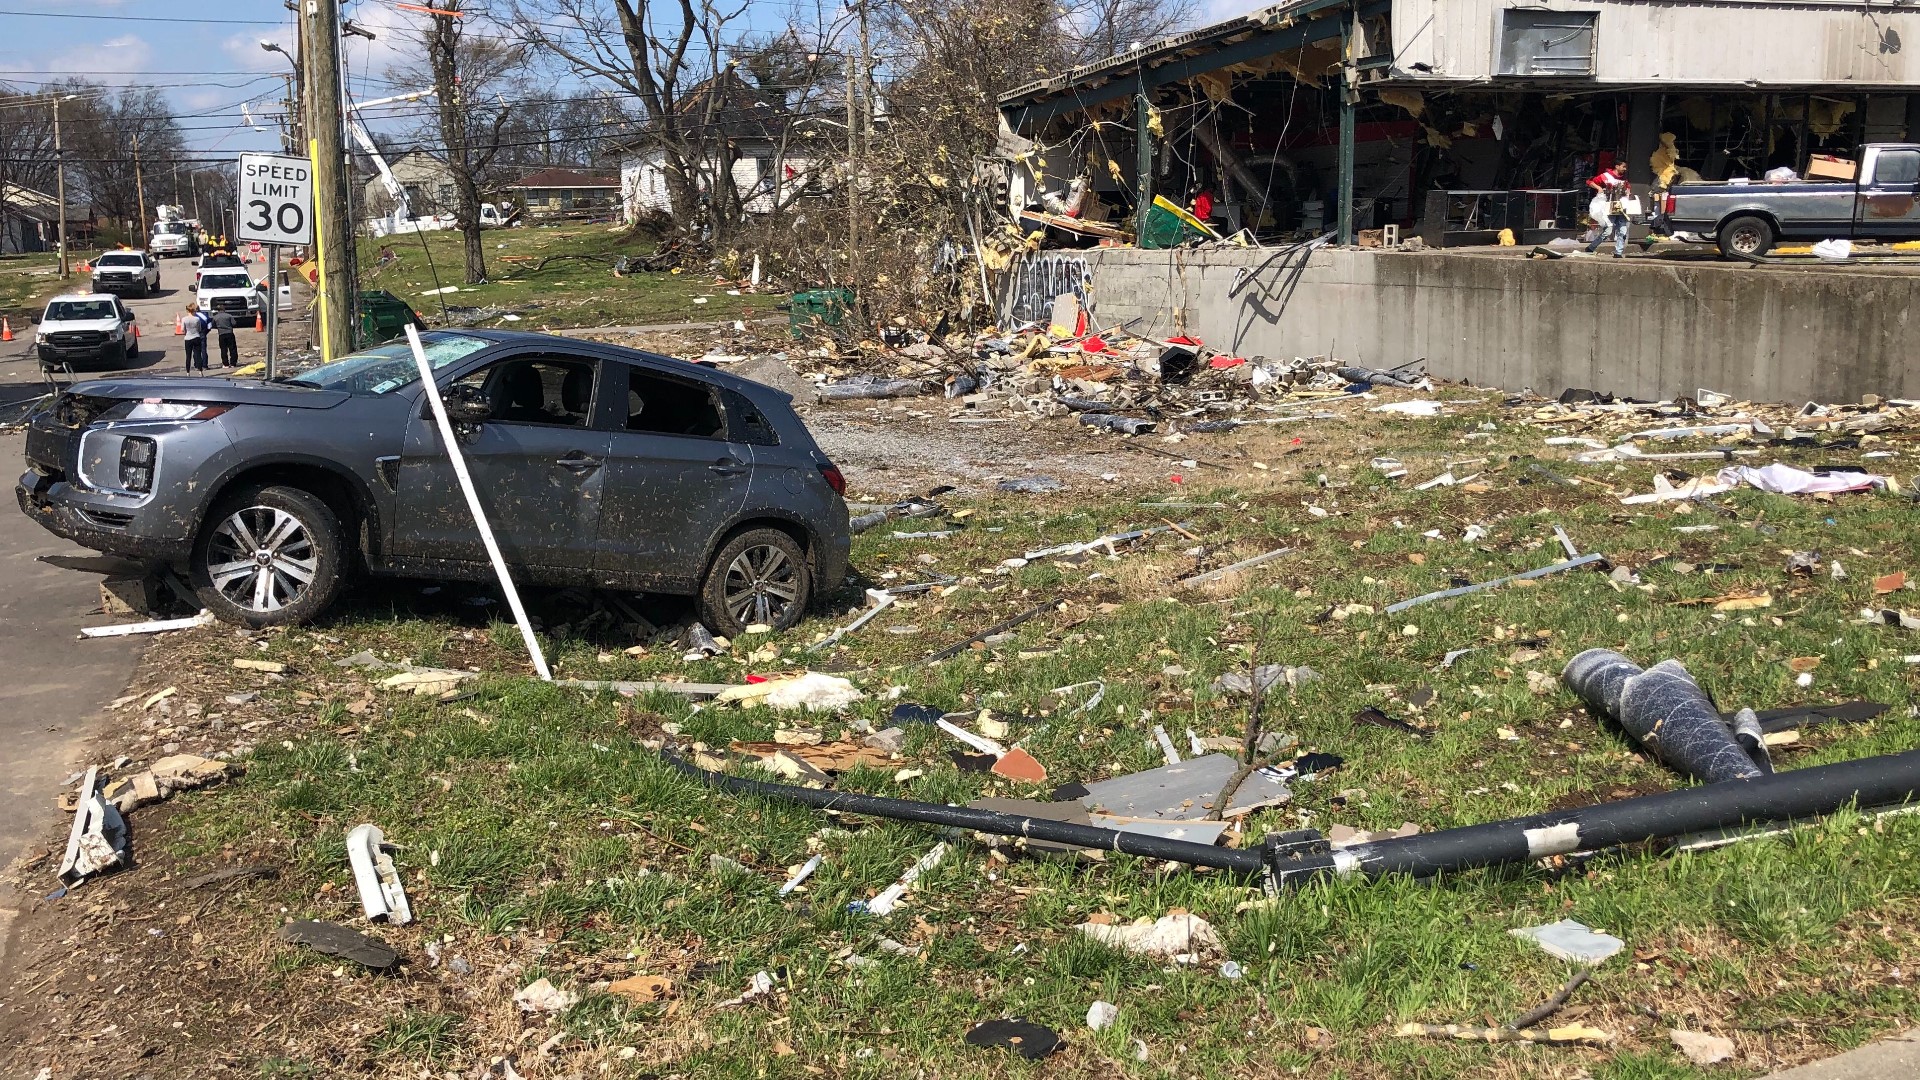 Tornadoes ripped through Nashville and other areas of Tennessee early Tuesday, leaving a path of death and destruction, officials confirm.